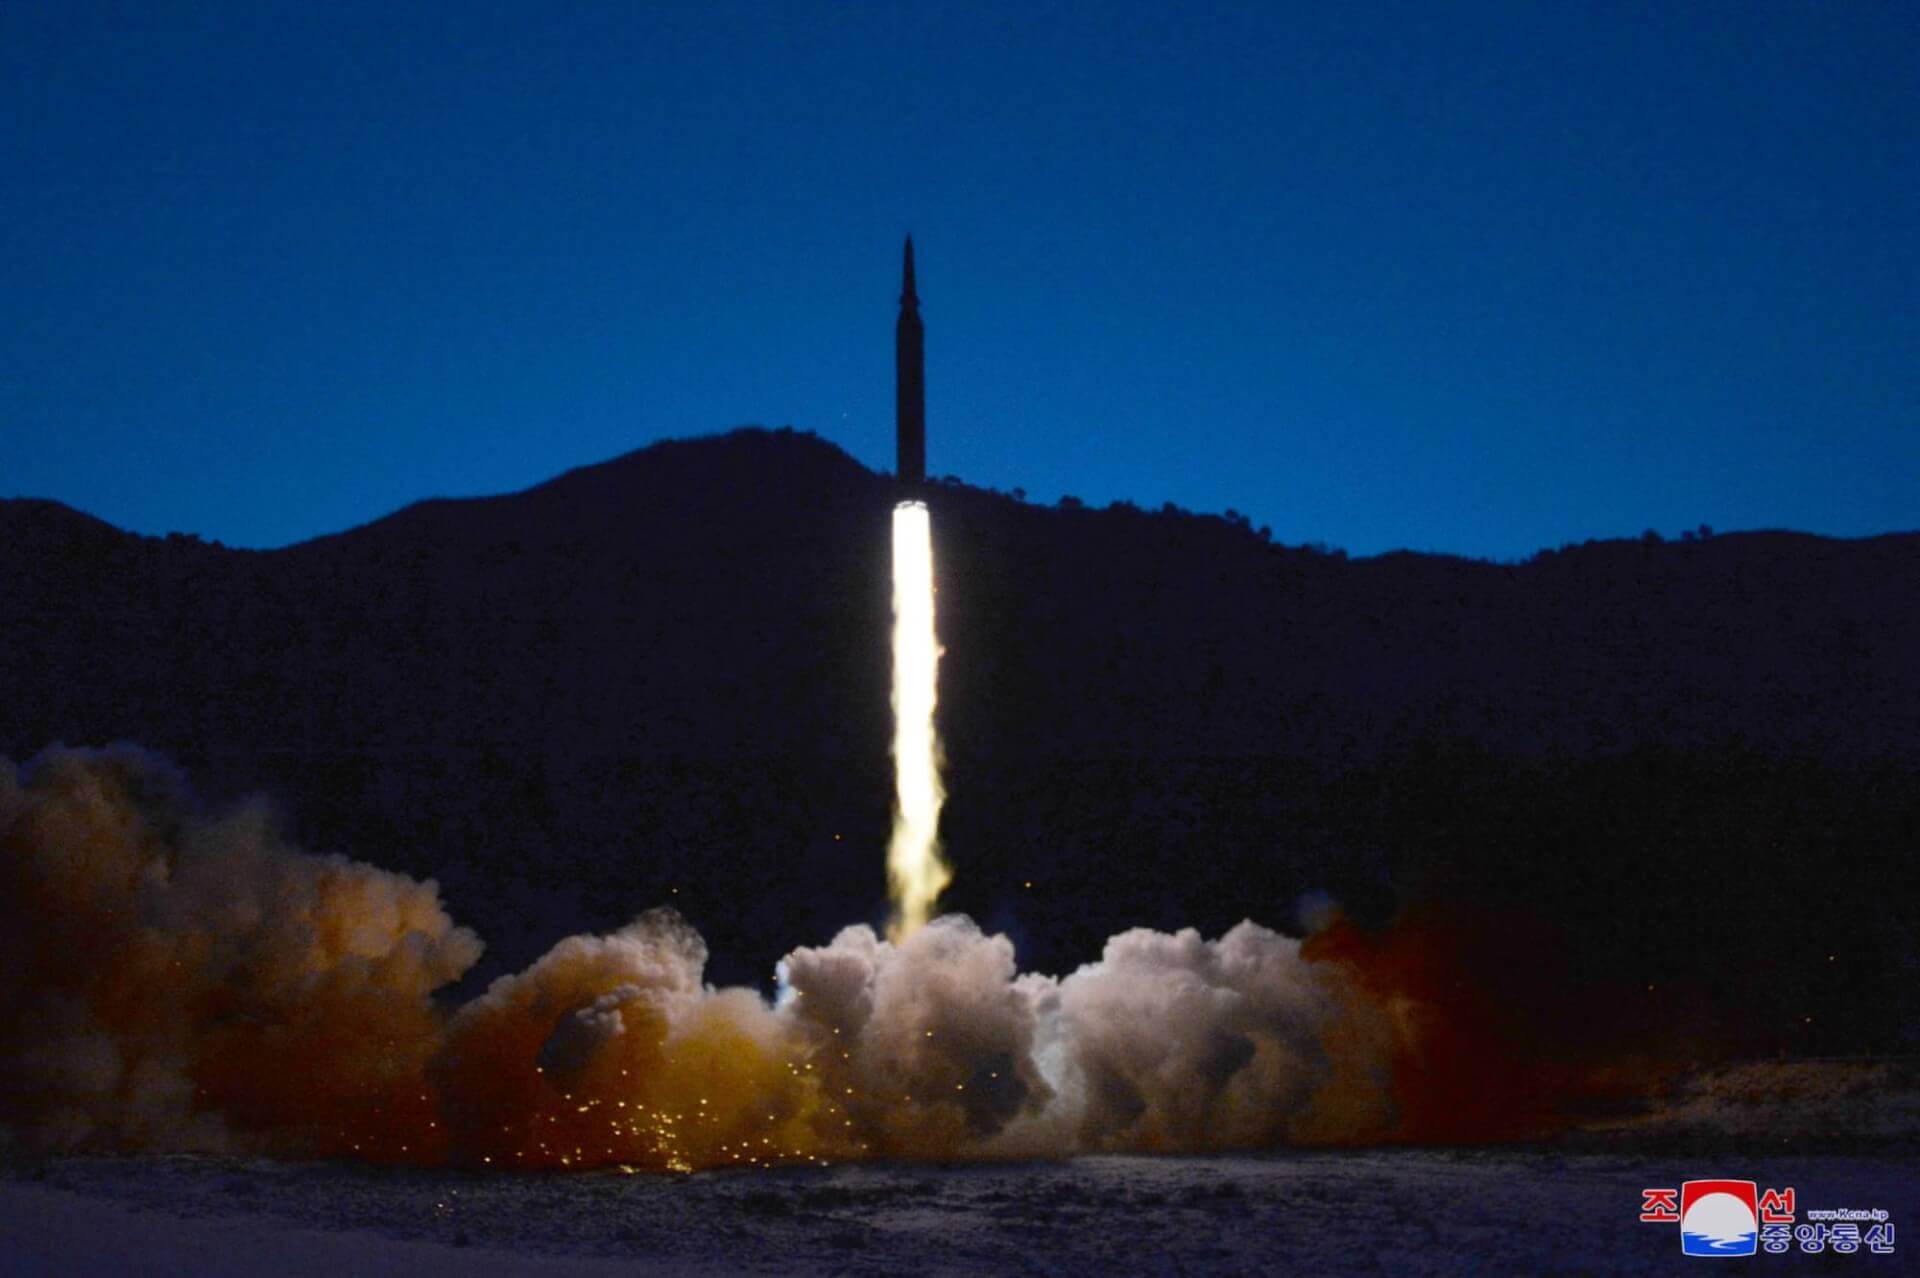 North Korea Says It May Resume Nuclear Tests, UNSC Not Considering Sanctions